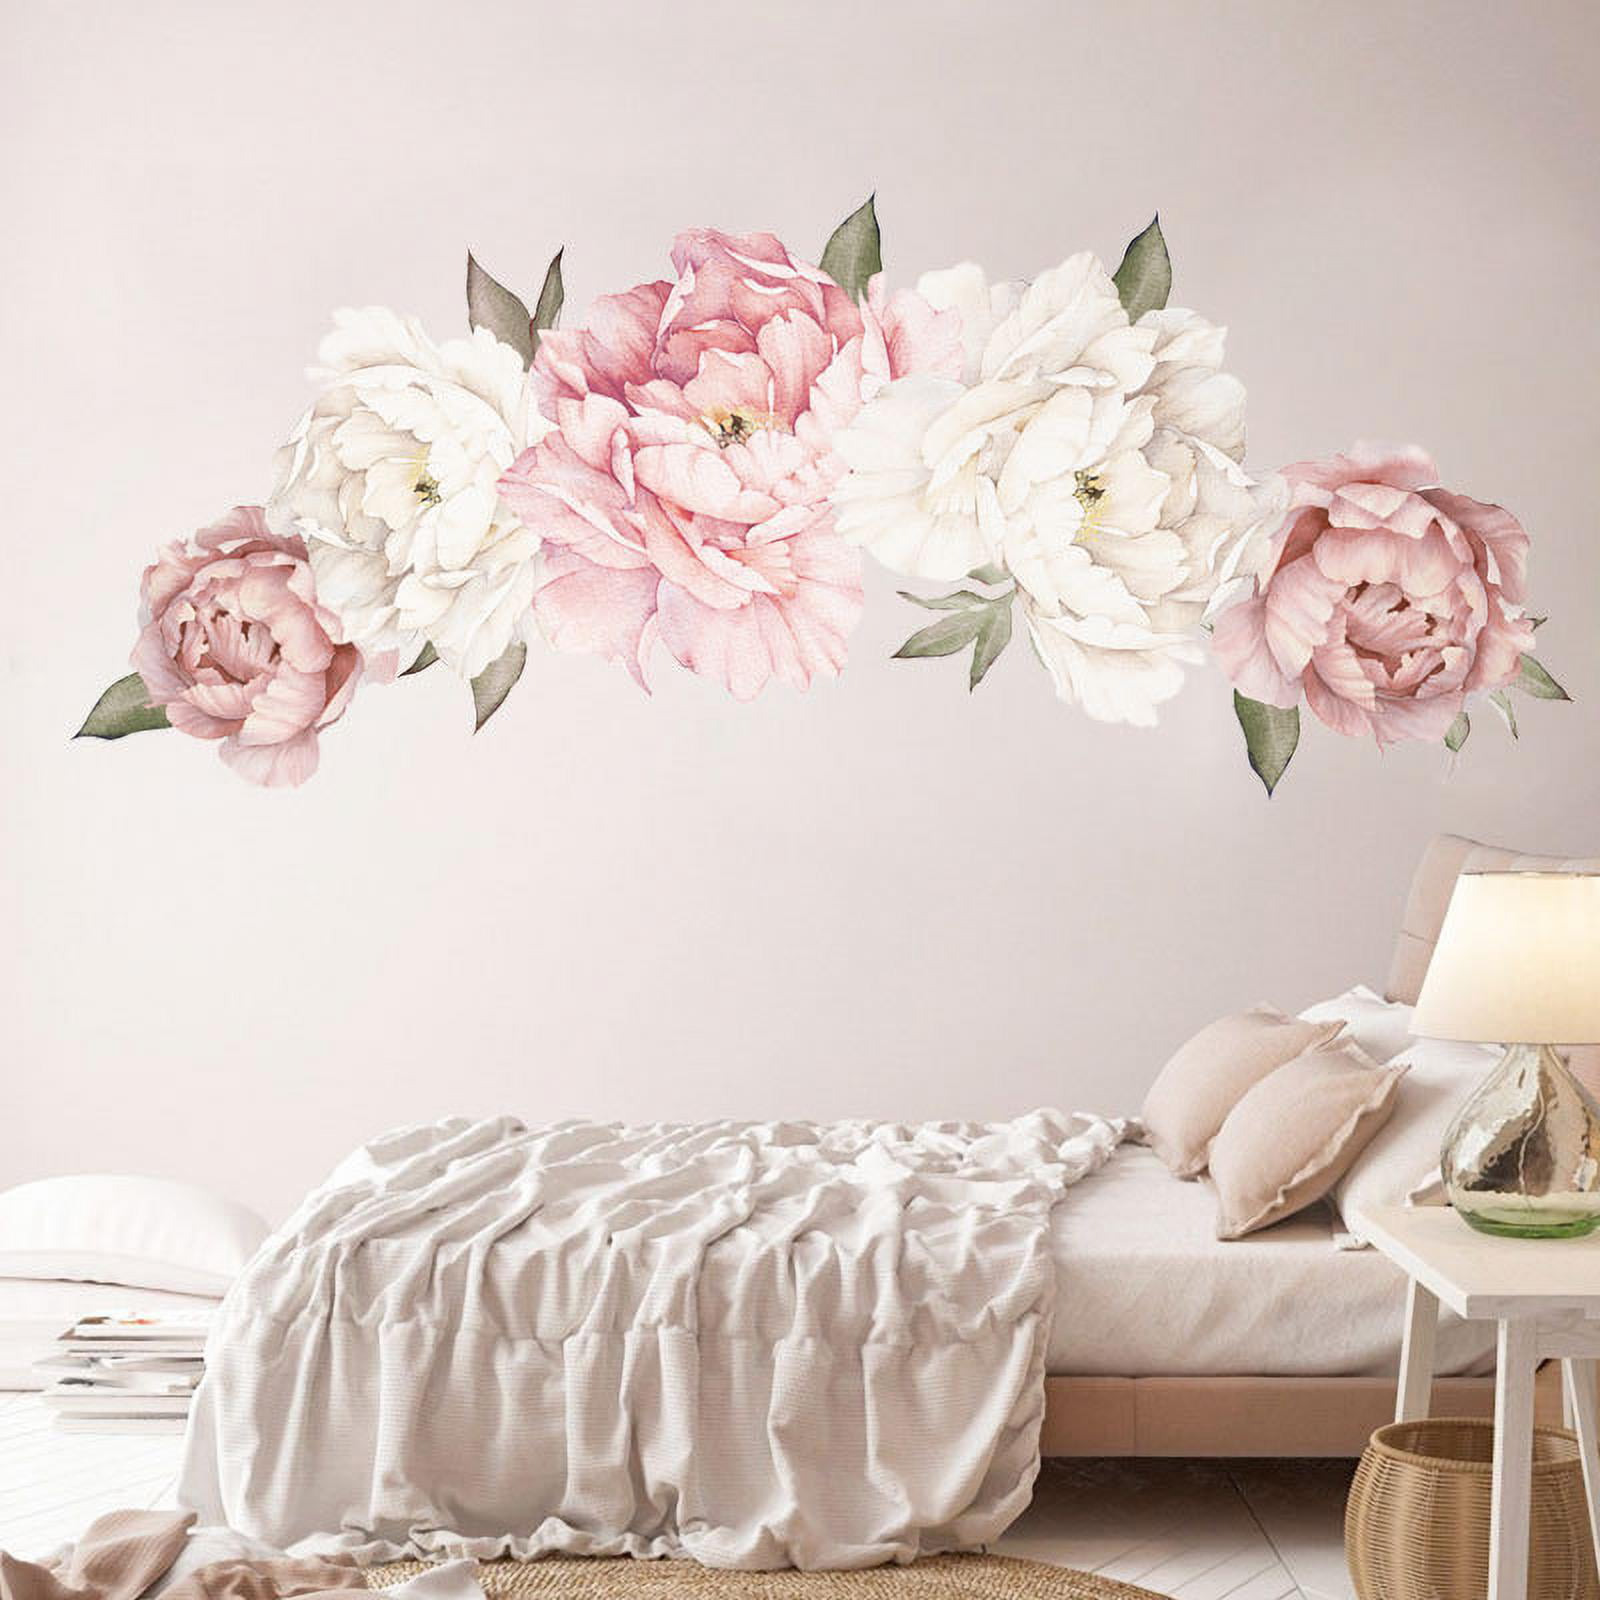 Wall Stickers Peony Flower Removable Kitchen Toilet Decal Waterproof Decor 